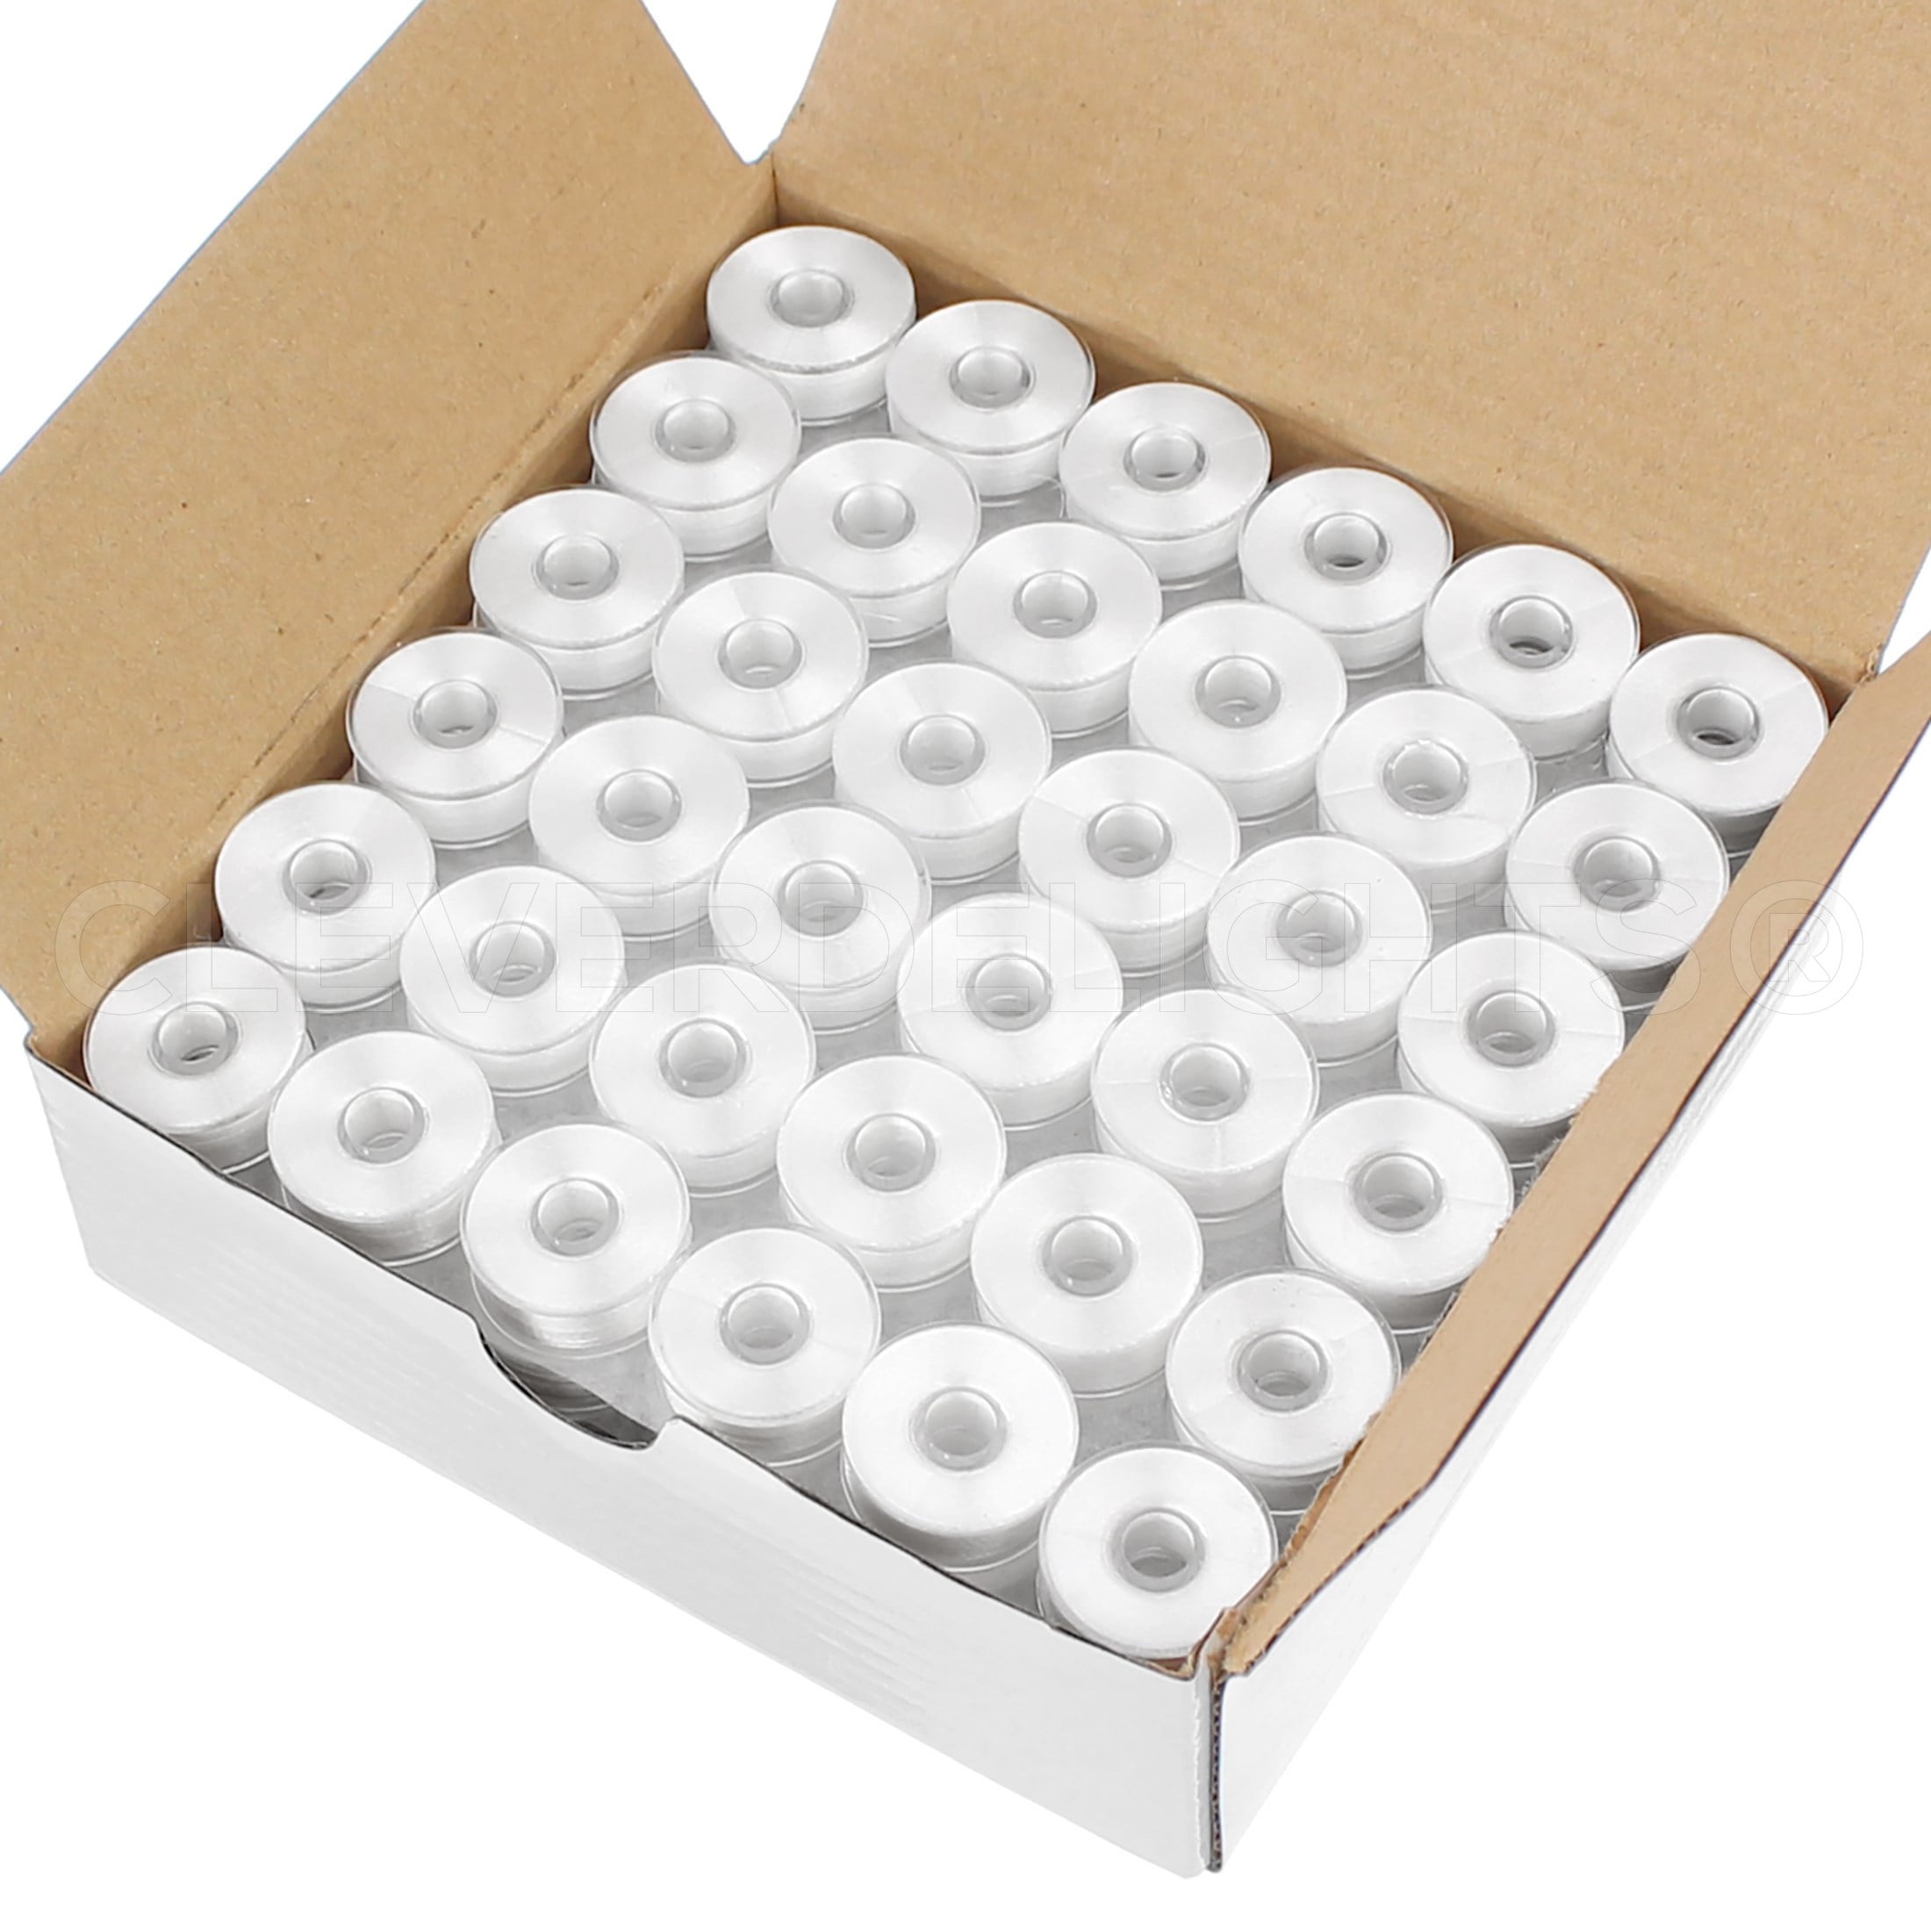 144 Count Per Box L Style Black Plastic Sided Threadart Prewound Embroidery Bobbins 8 Options Available